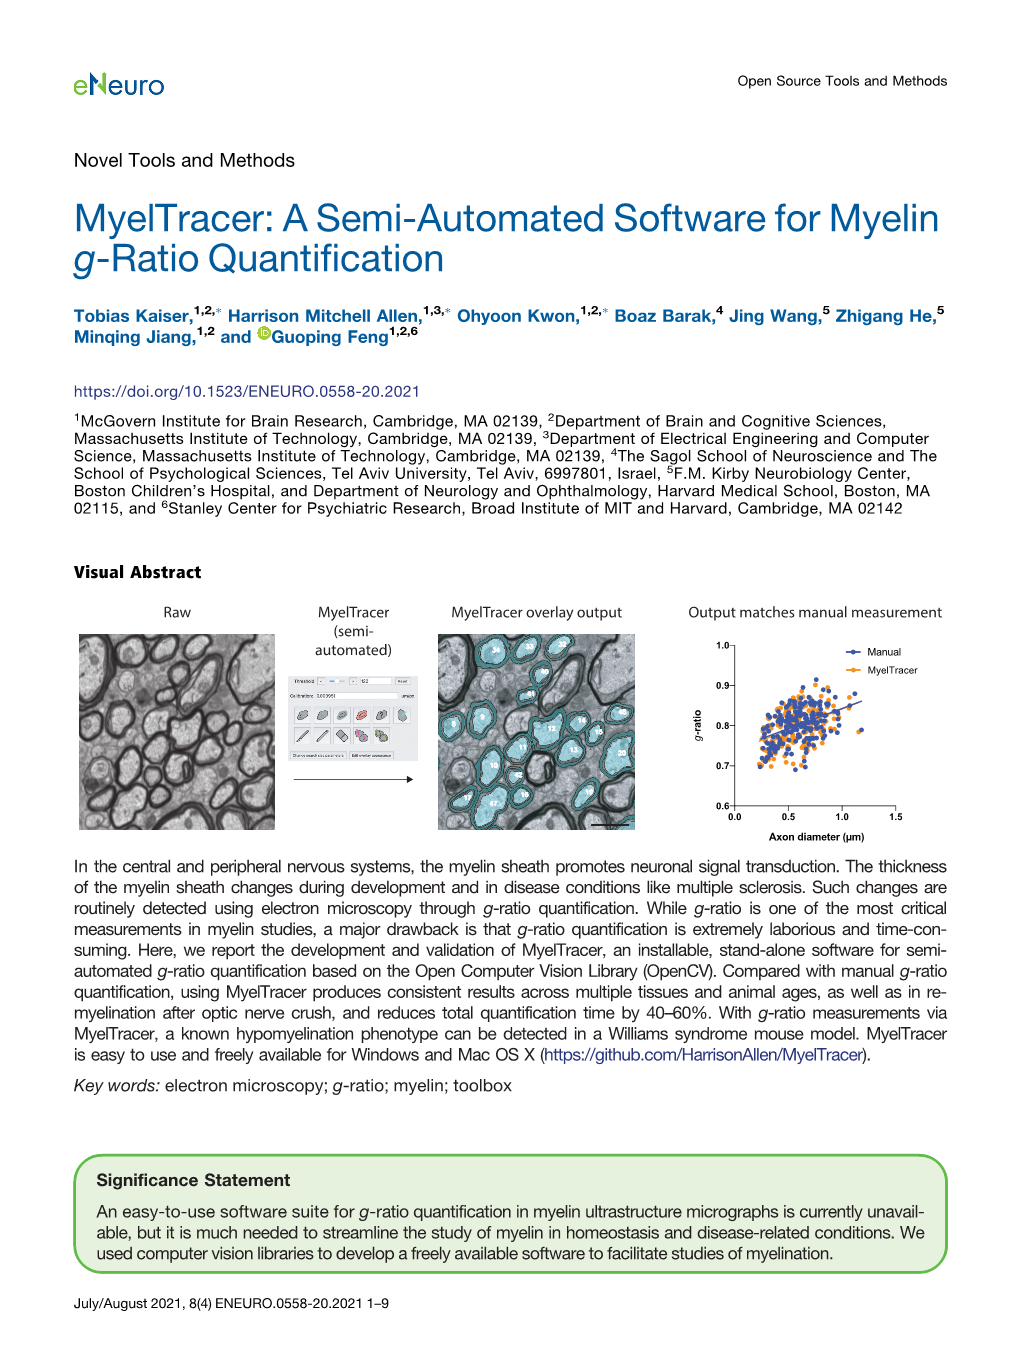 A Semi-Automated Software for Myelin G-Ratio Quantification